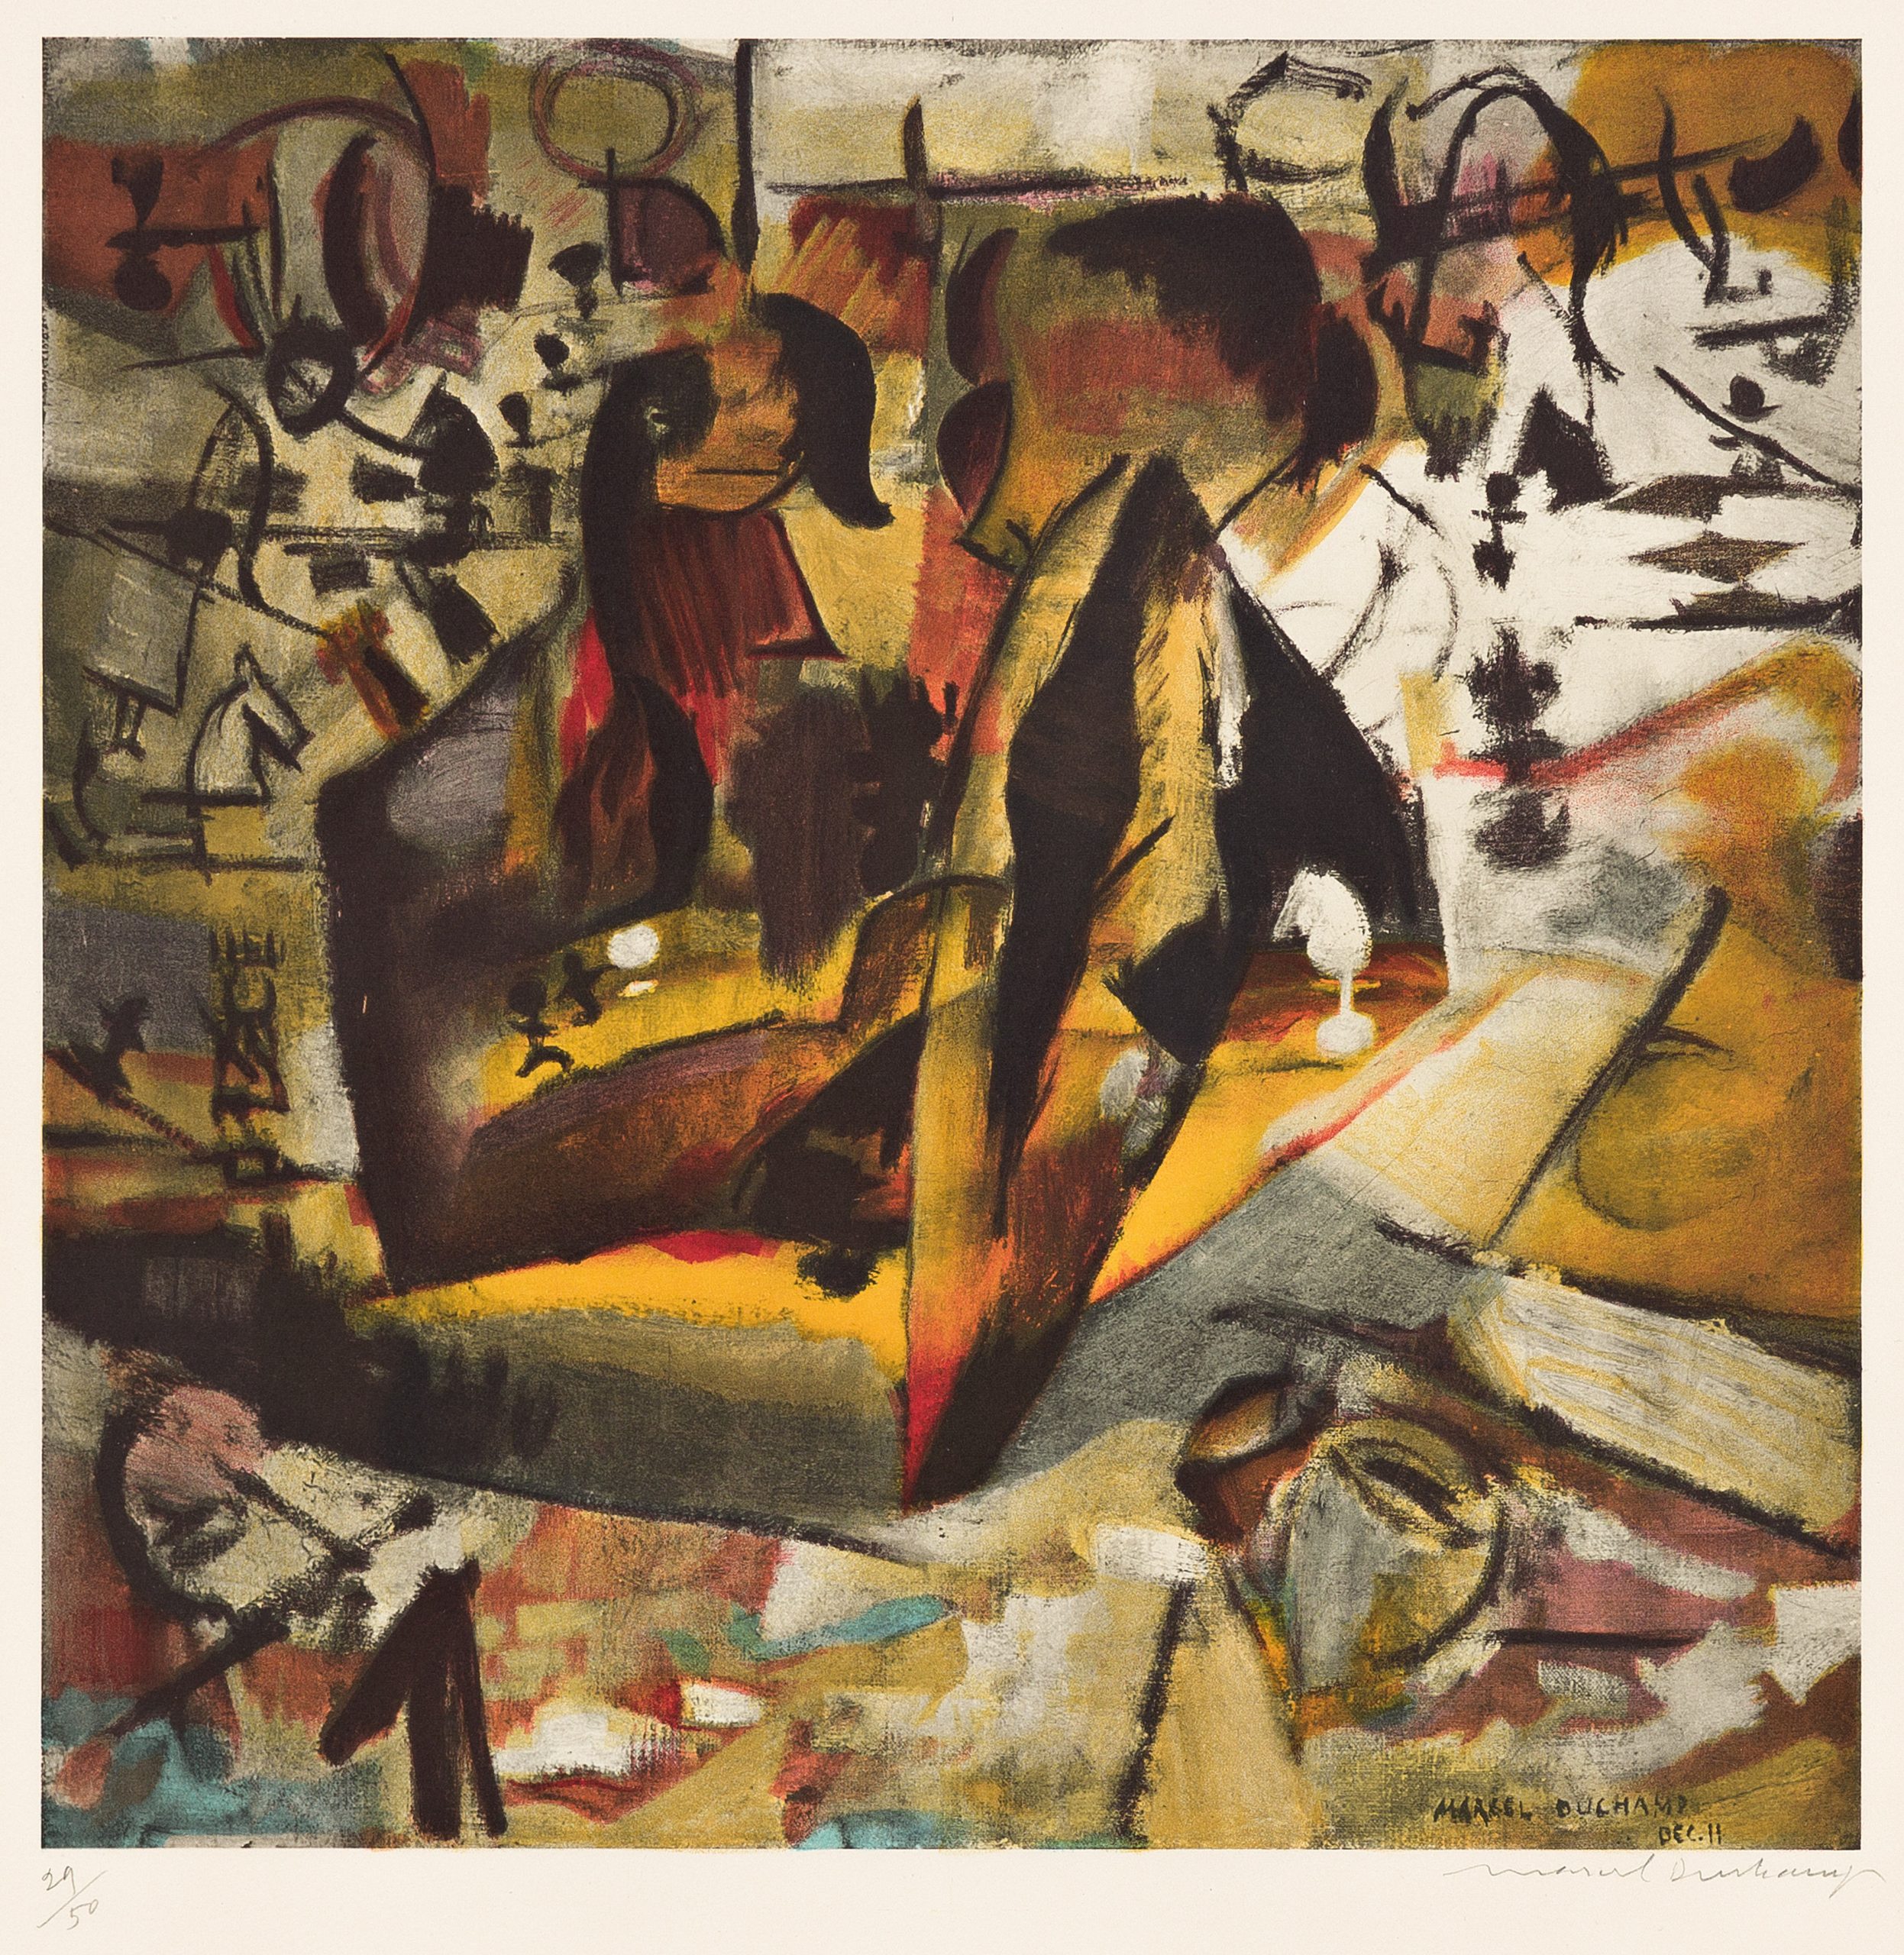 Marcel Duchamp (after), The Chess Players, color offset lithograph, 1967.  Estimate $7,000 to $10,000. 